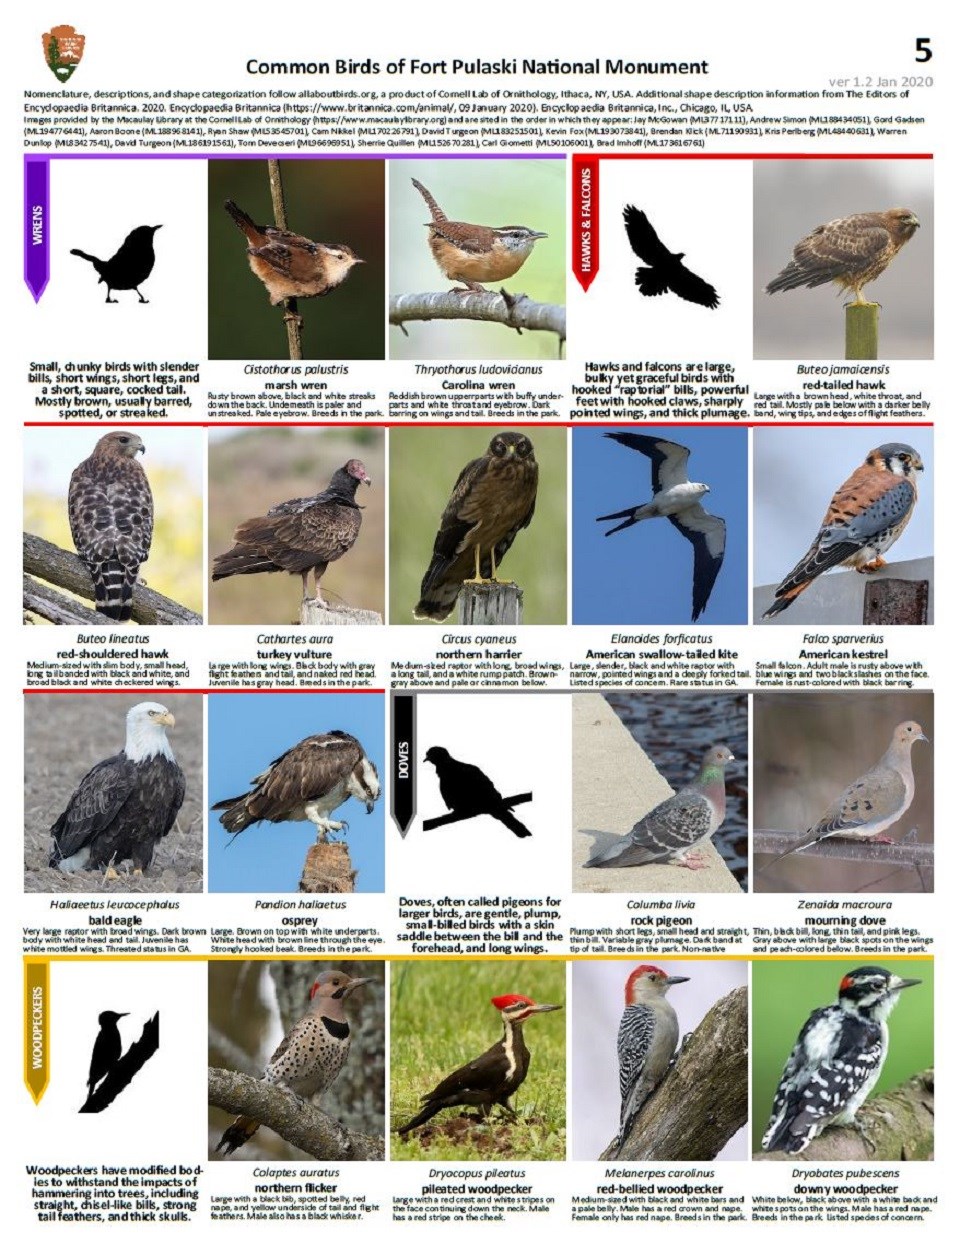 FOPU Bird ID Guide Page 5 - Wrens, Hawks & Falcons, Doves, and Woodpeckers